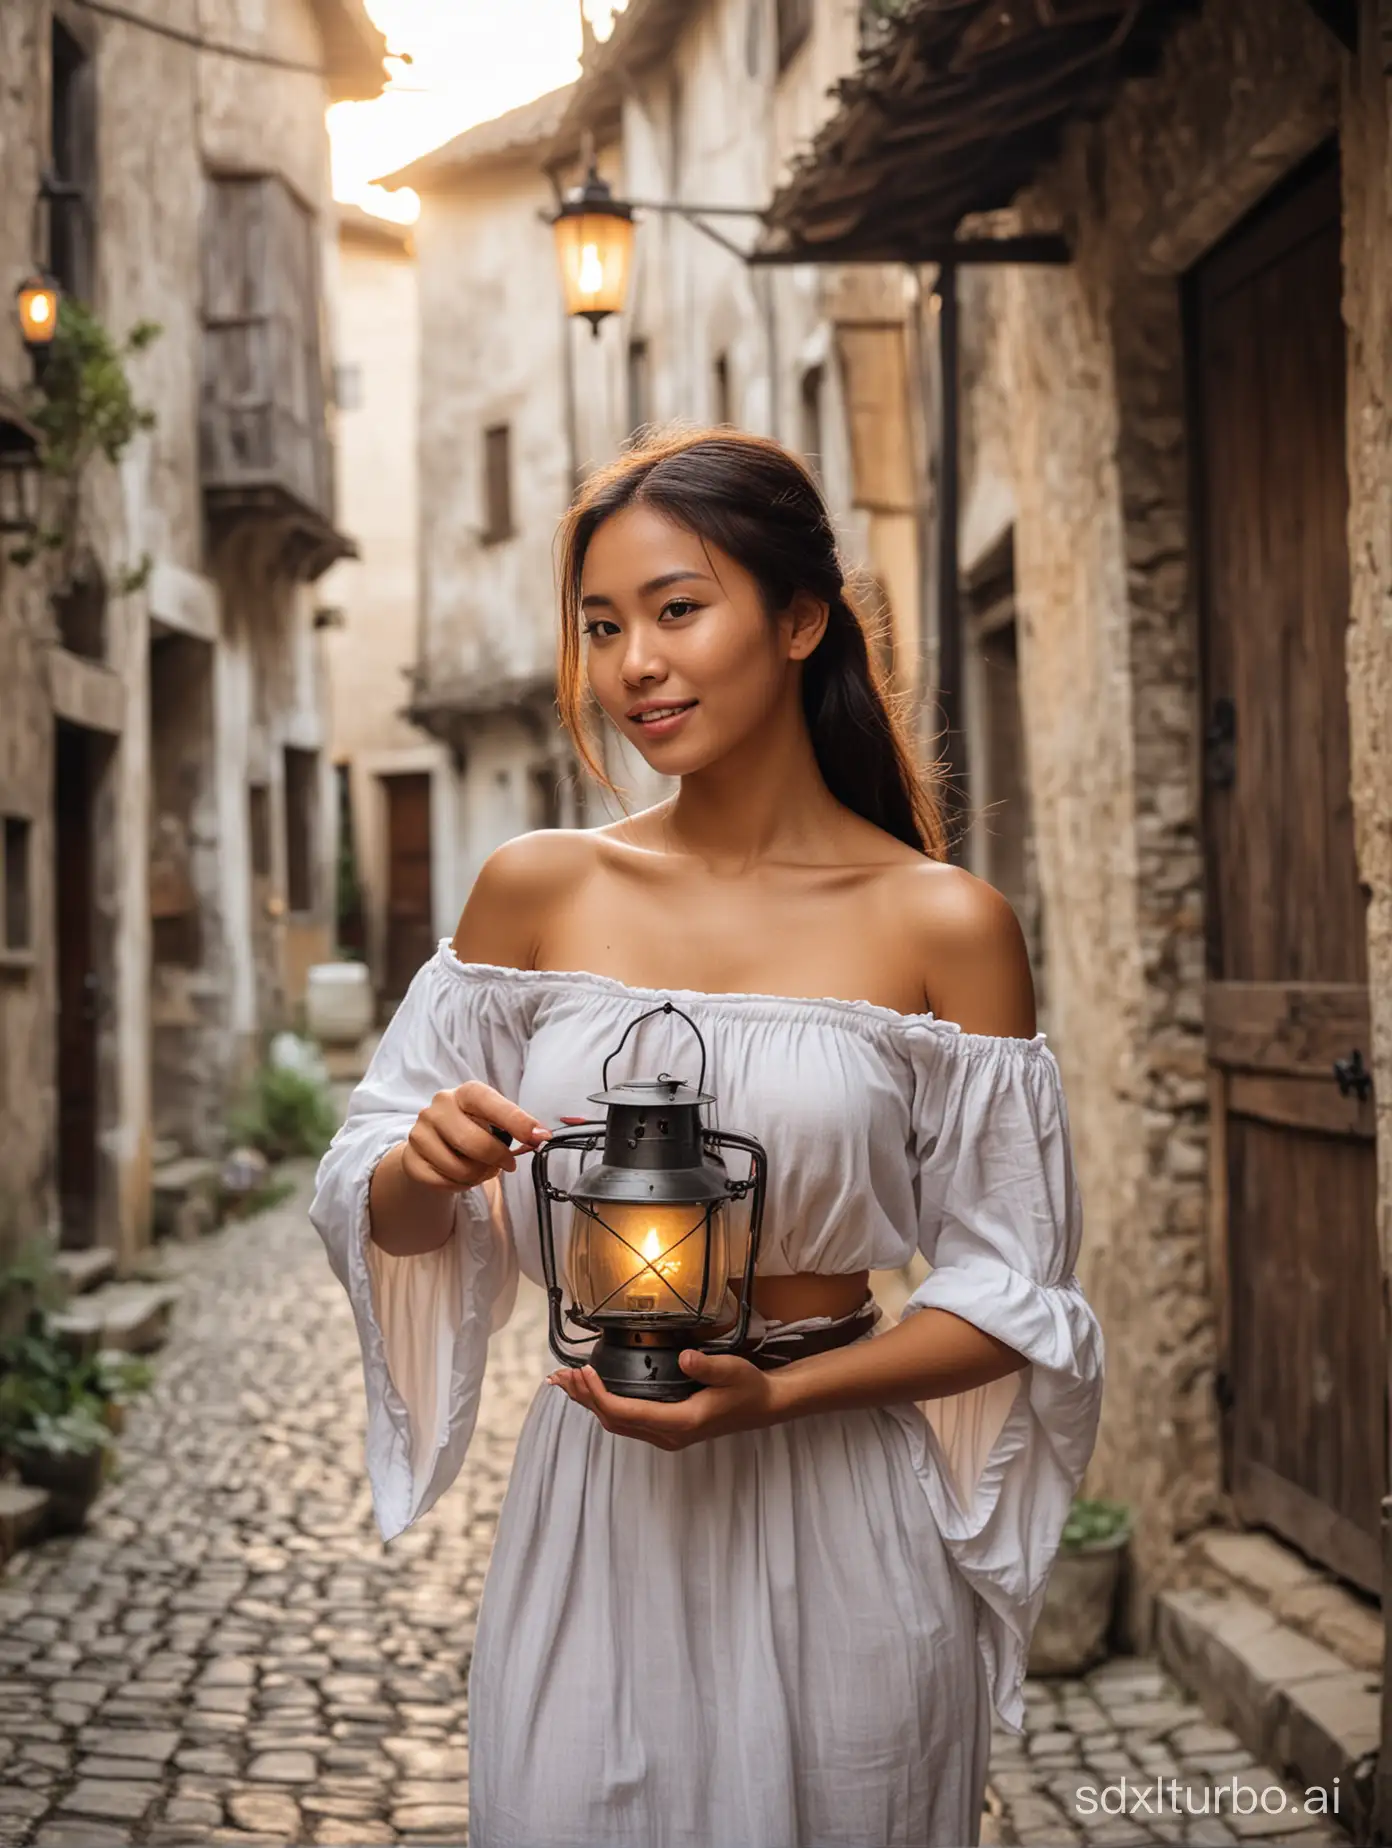 20 years old Filipina woman holding a lantern. Medieval time. Streets of medieval village. Chest Revealing, very small breasts, Cotton loincloth.